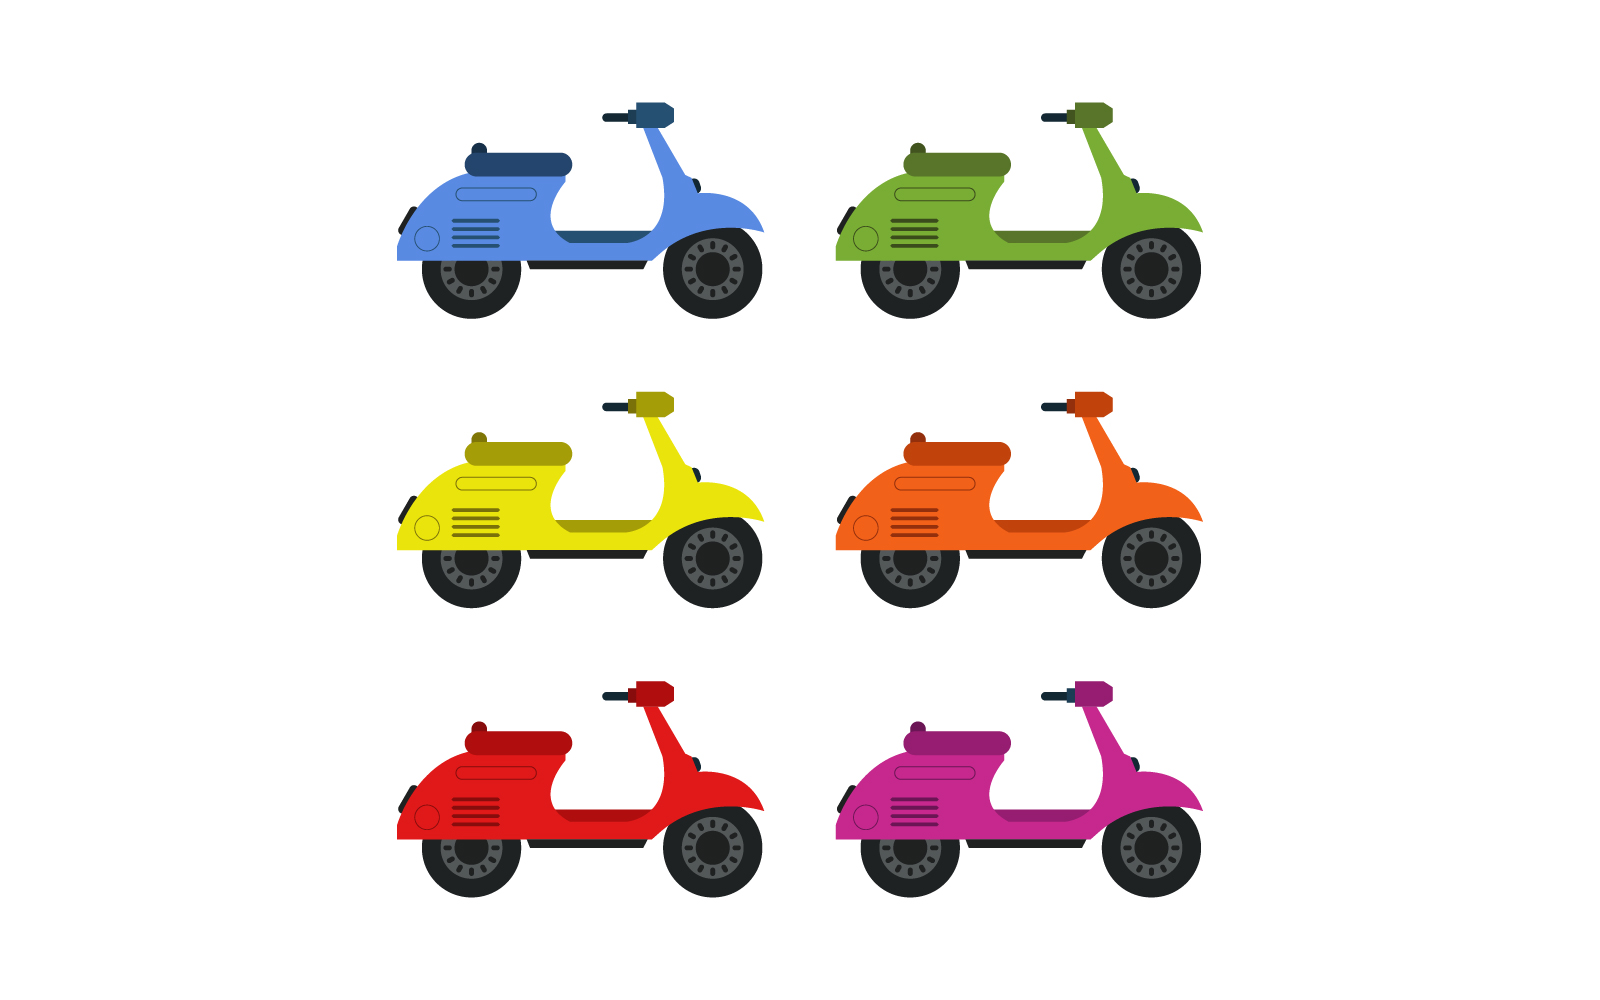 Retro scooter illustrated in vector